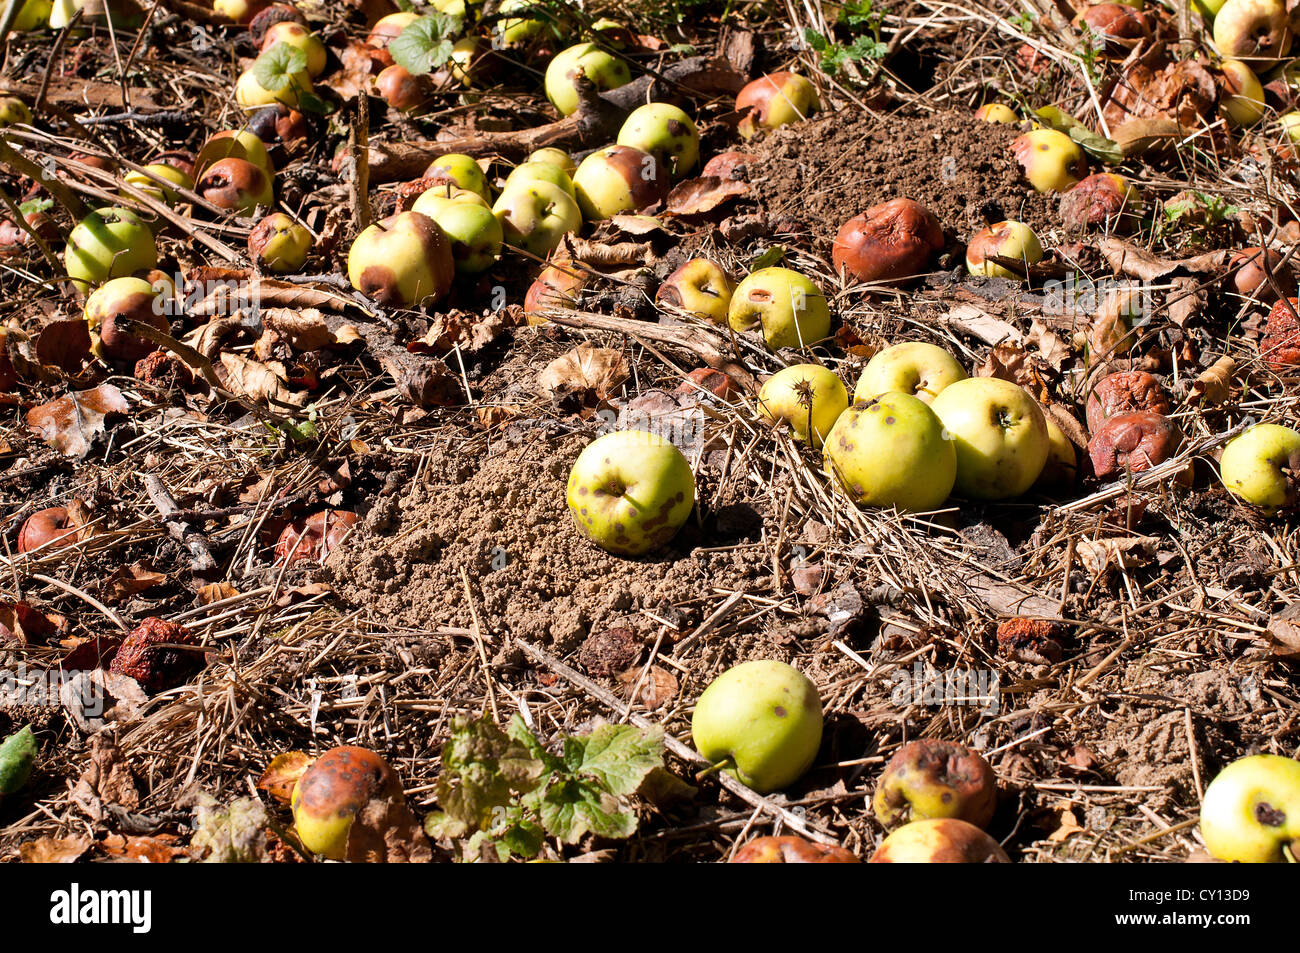 Autumn windfall apples - rotten apples dropped from the tree Stock Photo